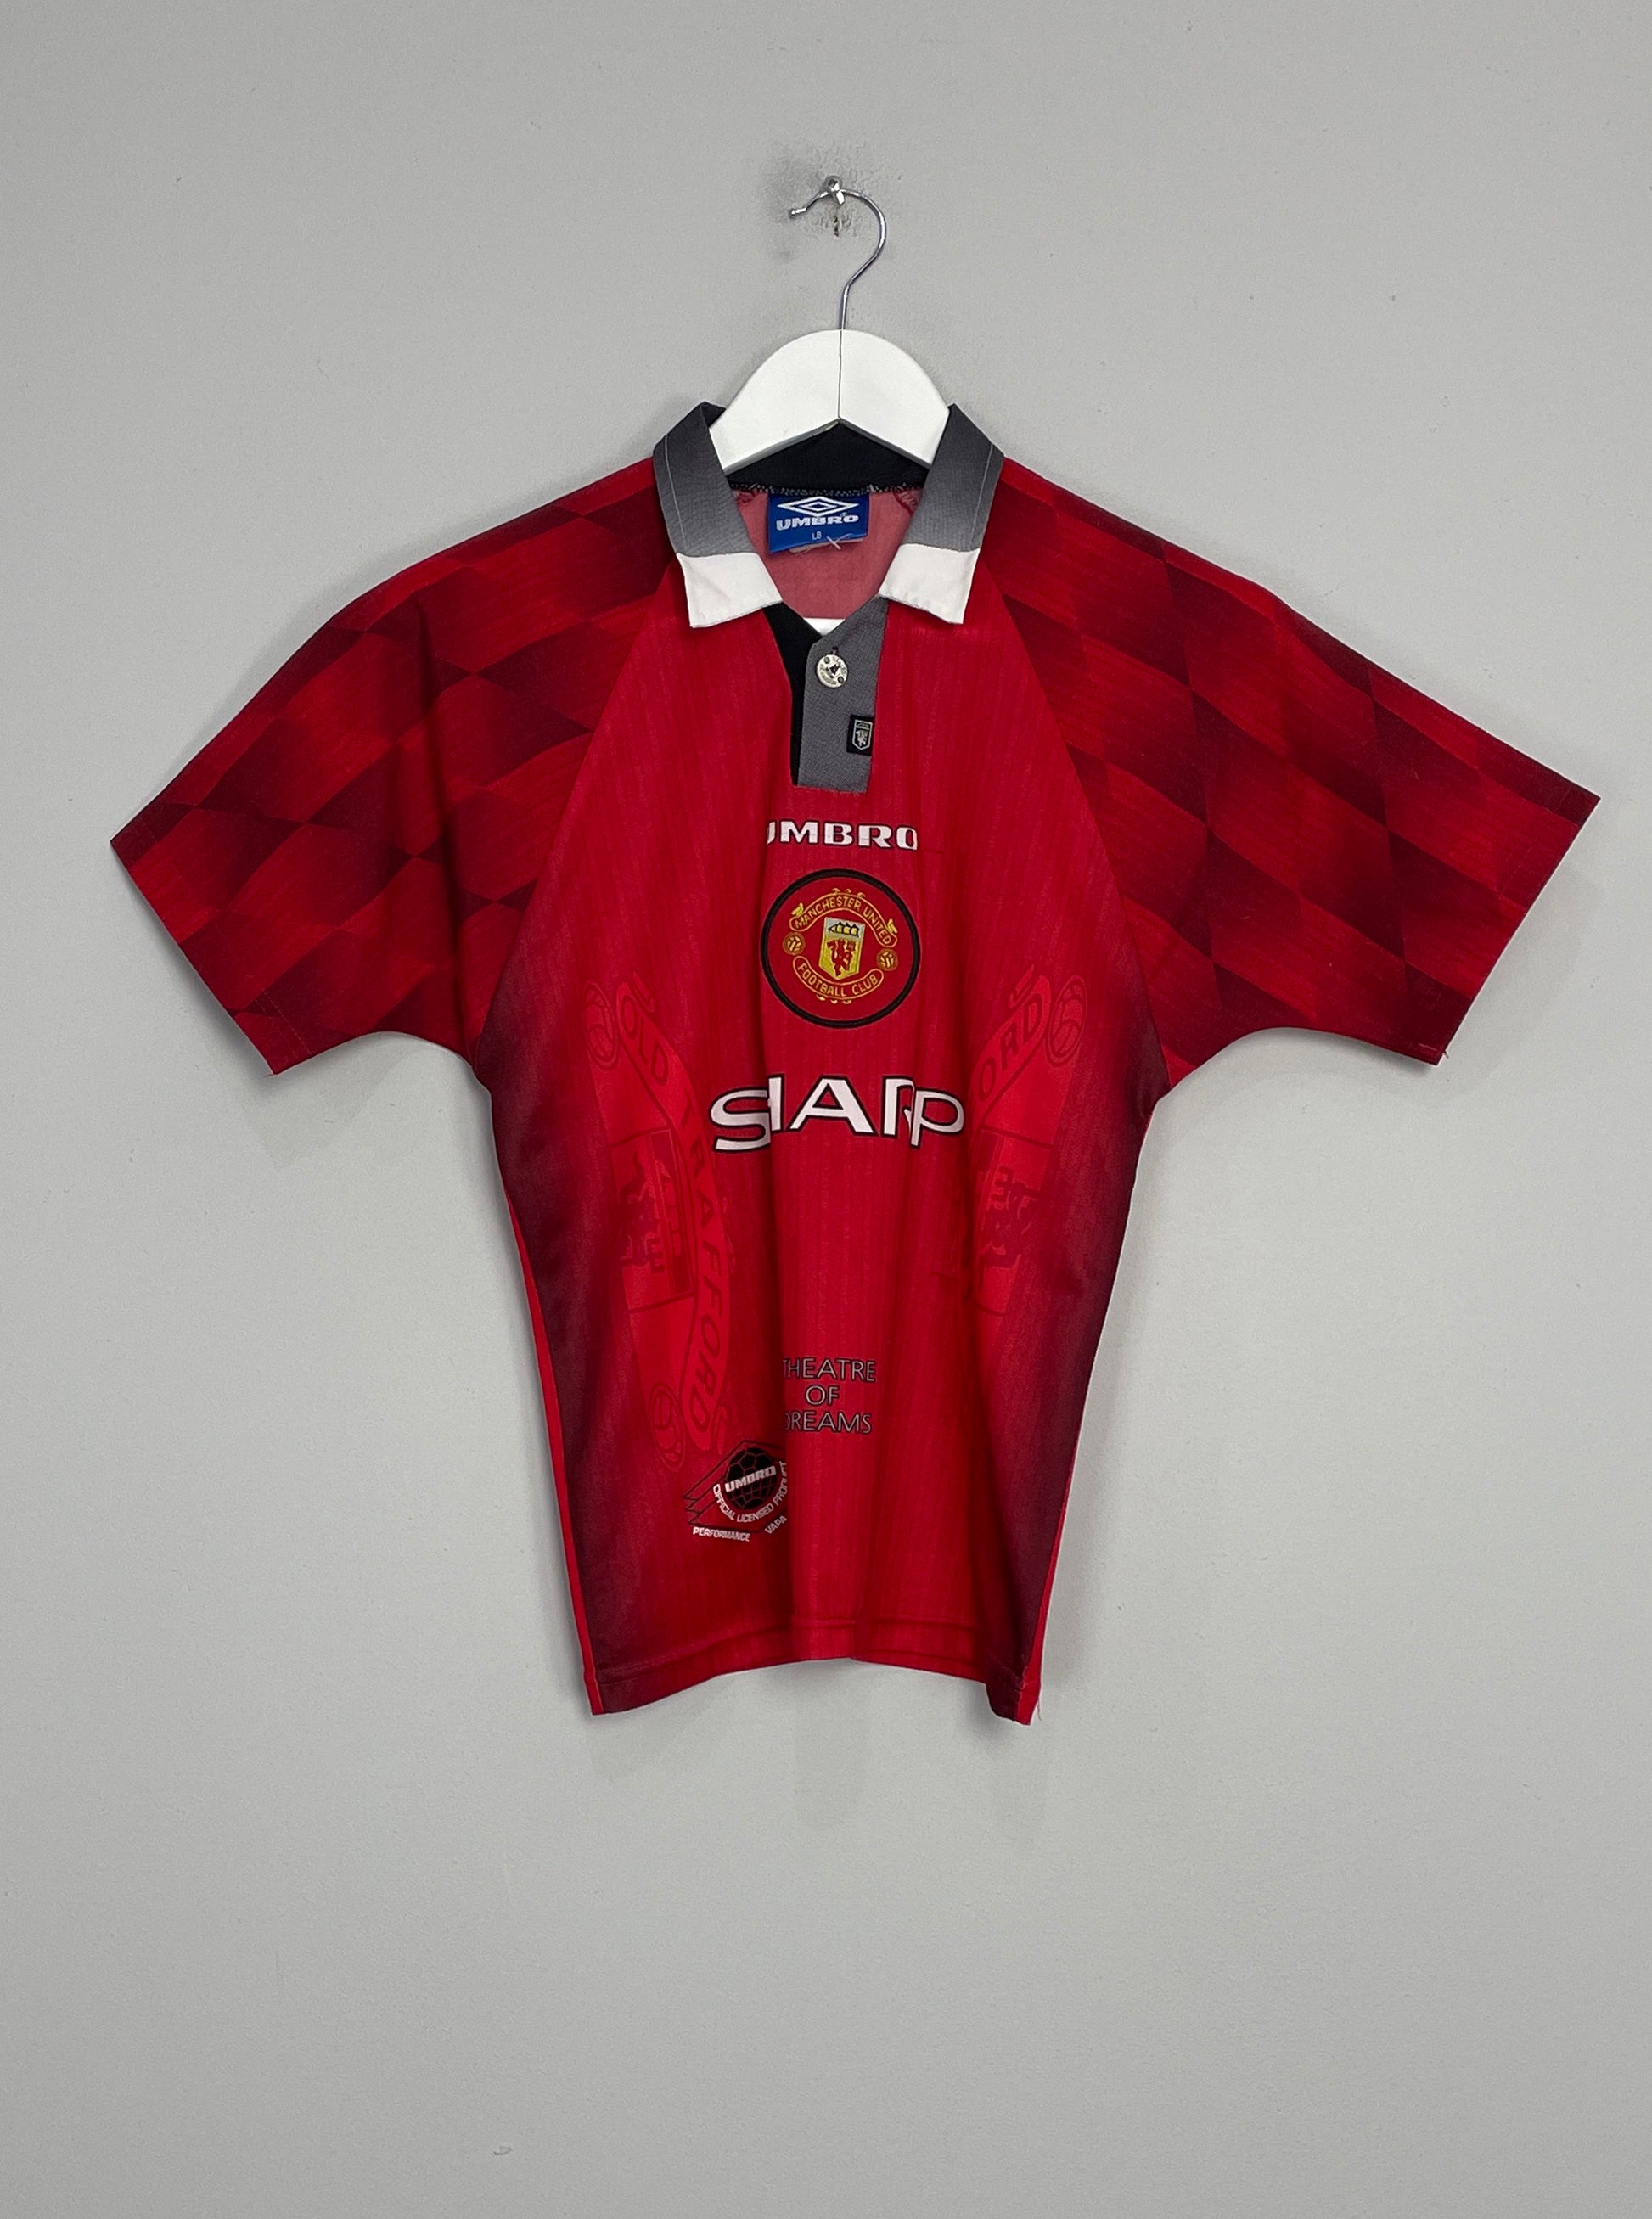 Image of the Manchester United shirt from the 1997/98 season